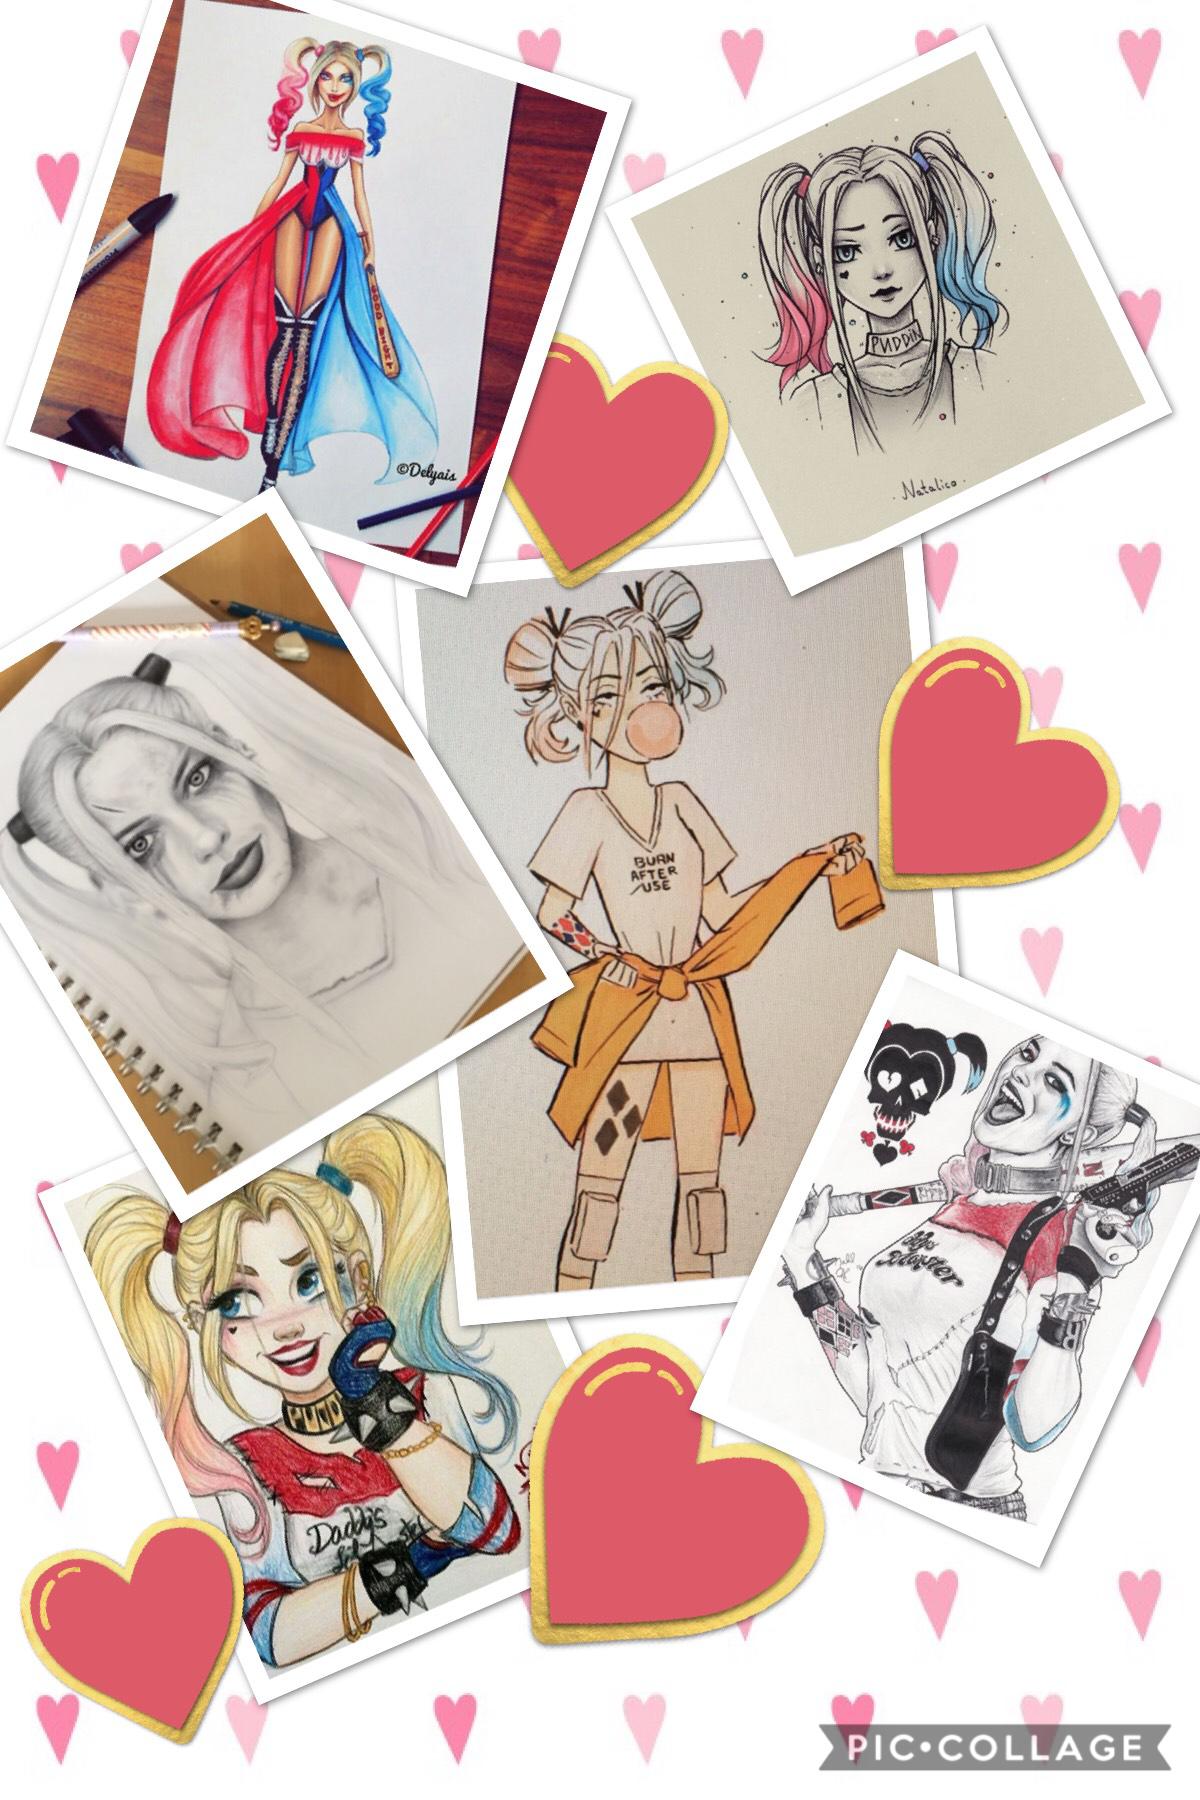 These are all of my drawings that I made hope you like them❤️